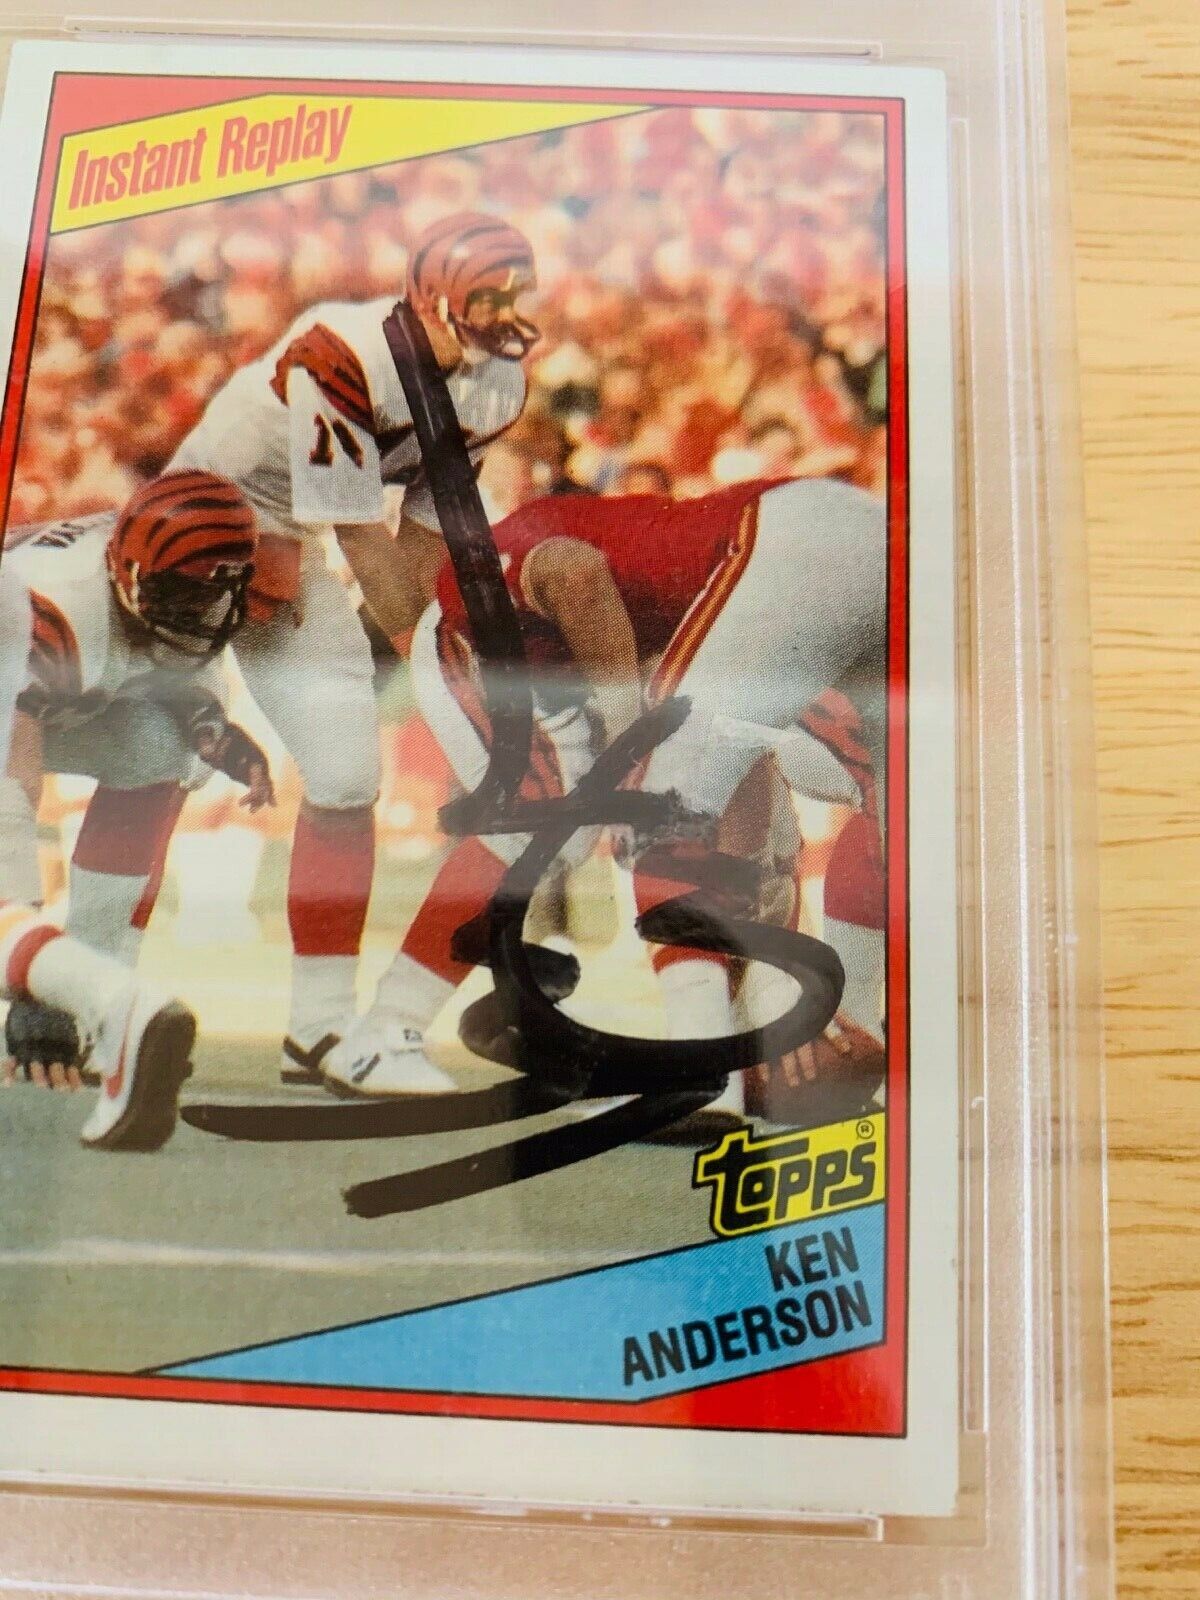 Ken Anderson Autographed Signed 1984 Topps Football Card PSA Certified Slabbed